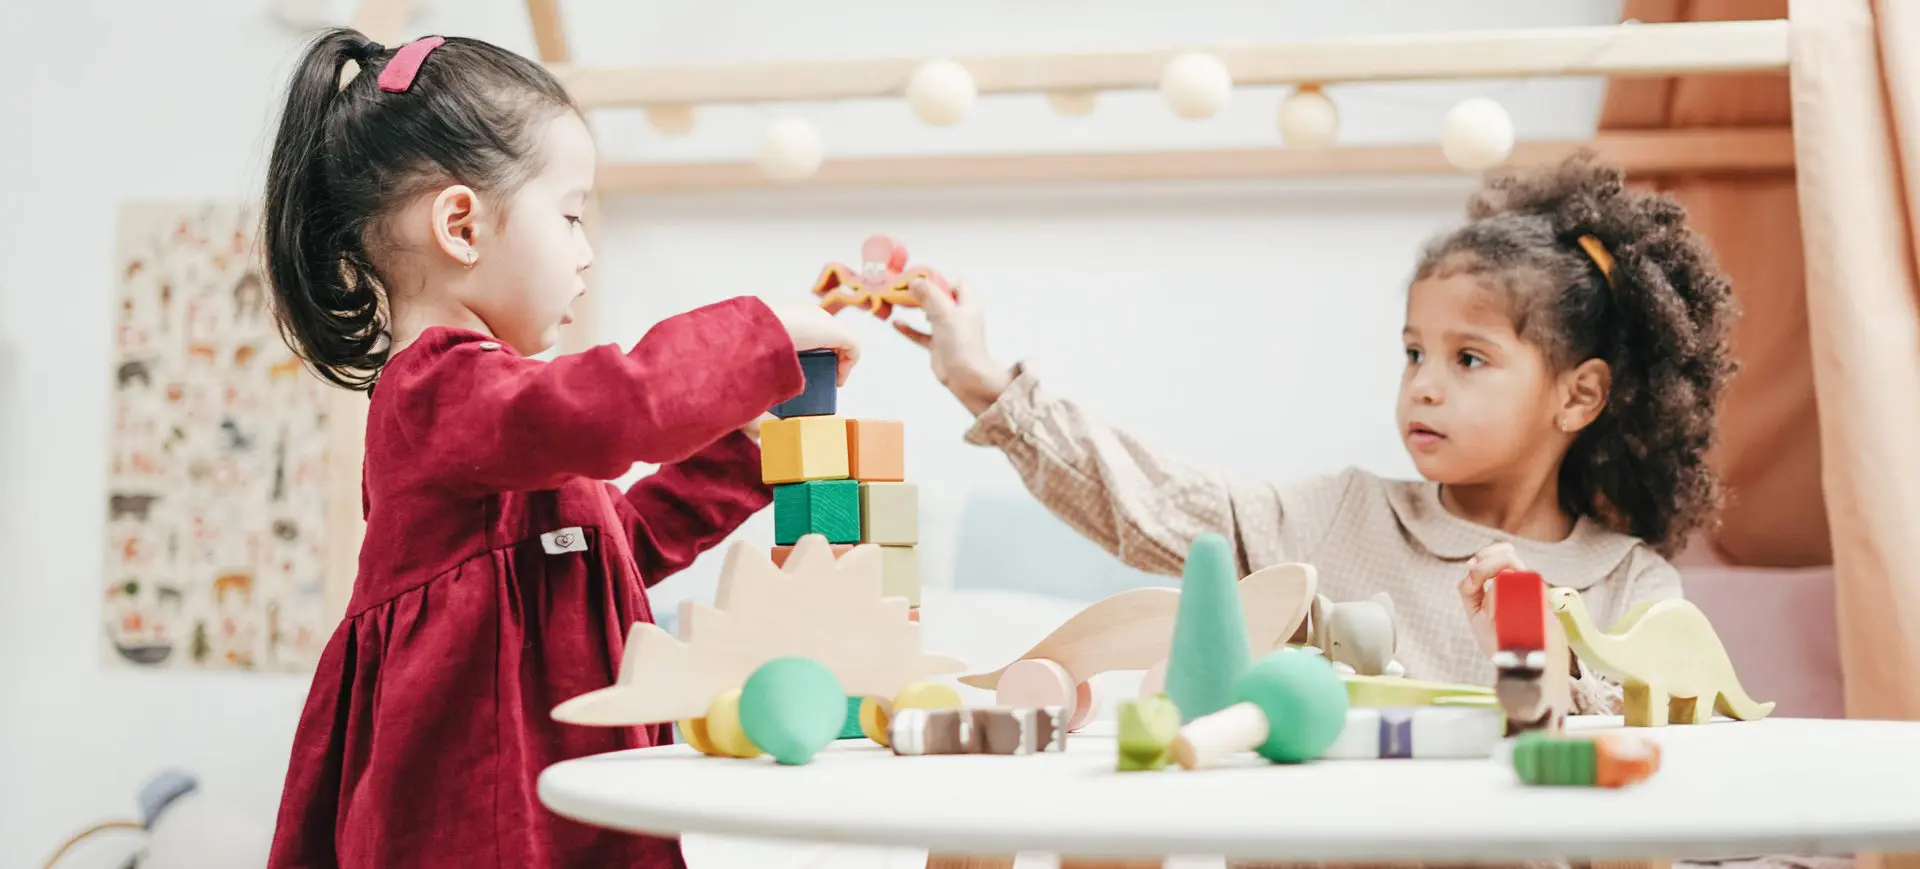 A child playing with blocks at the table